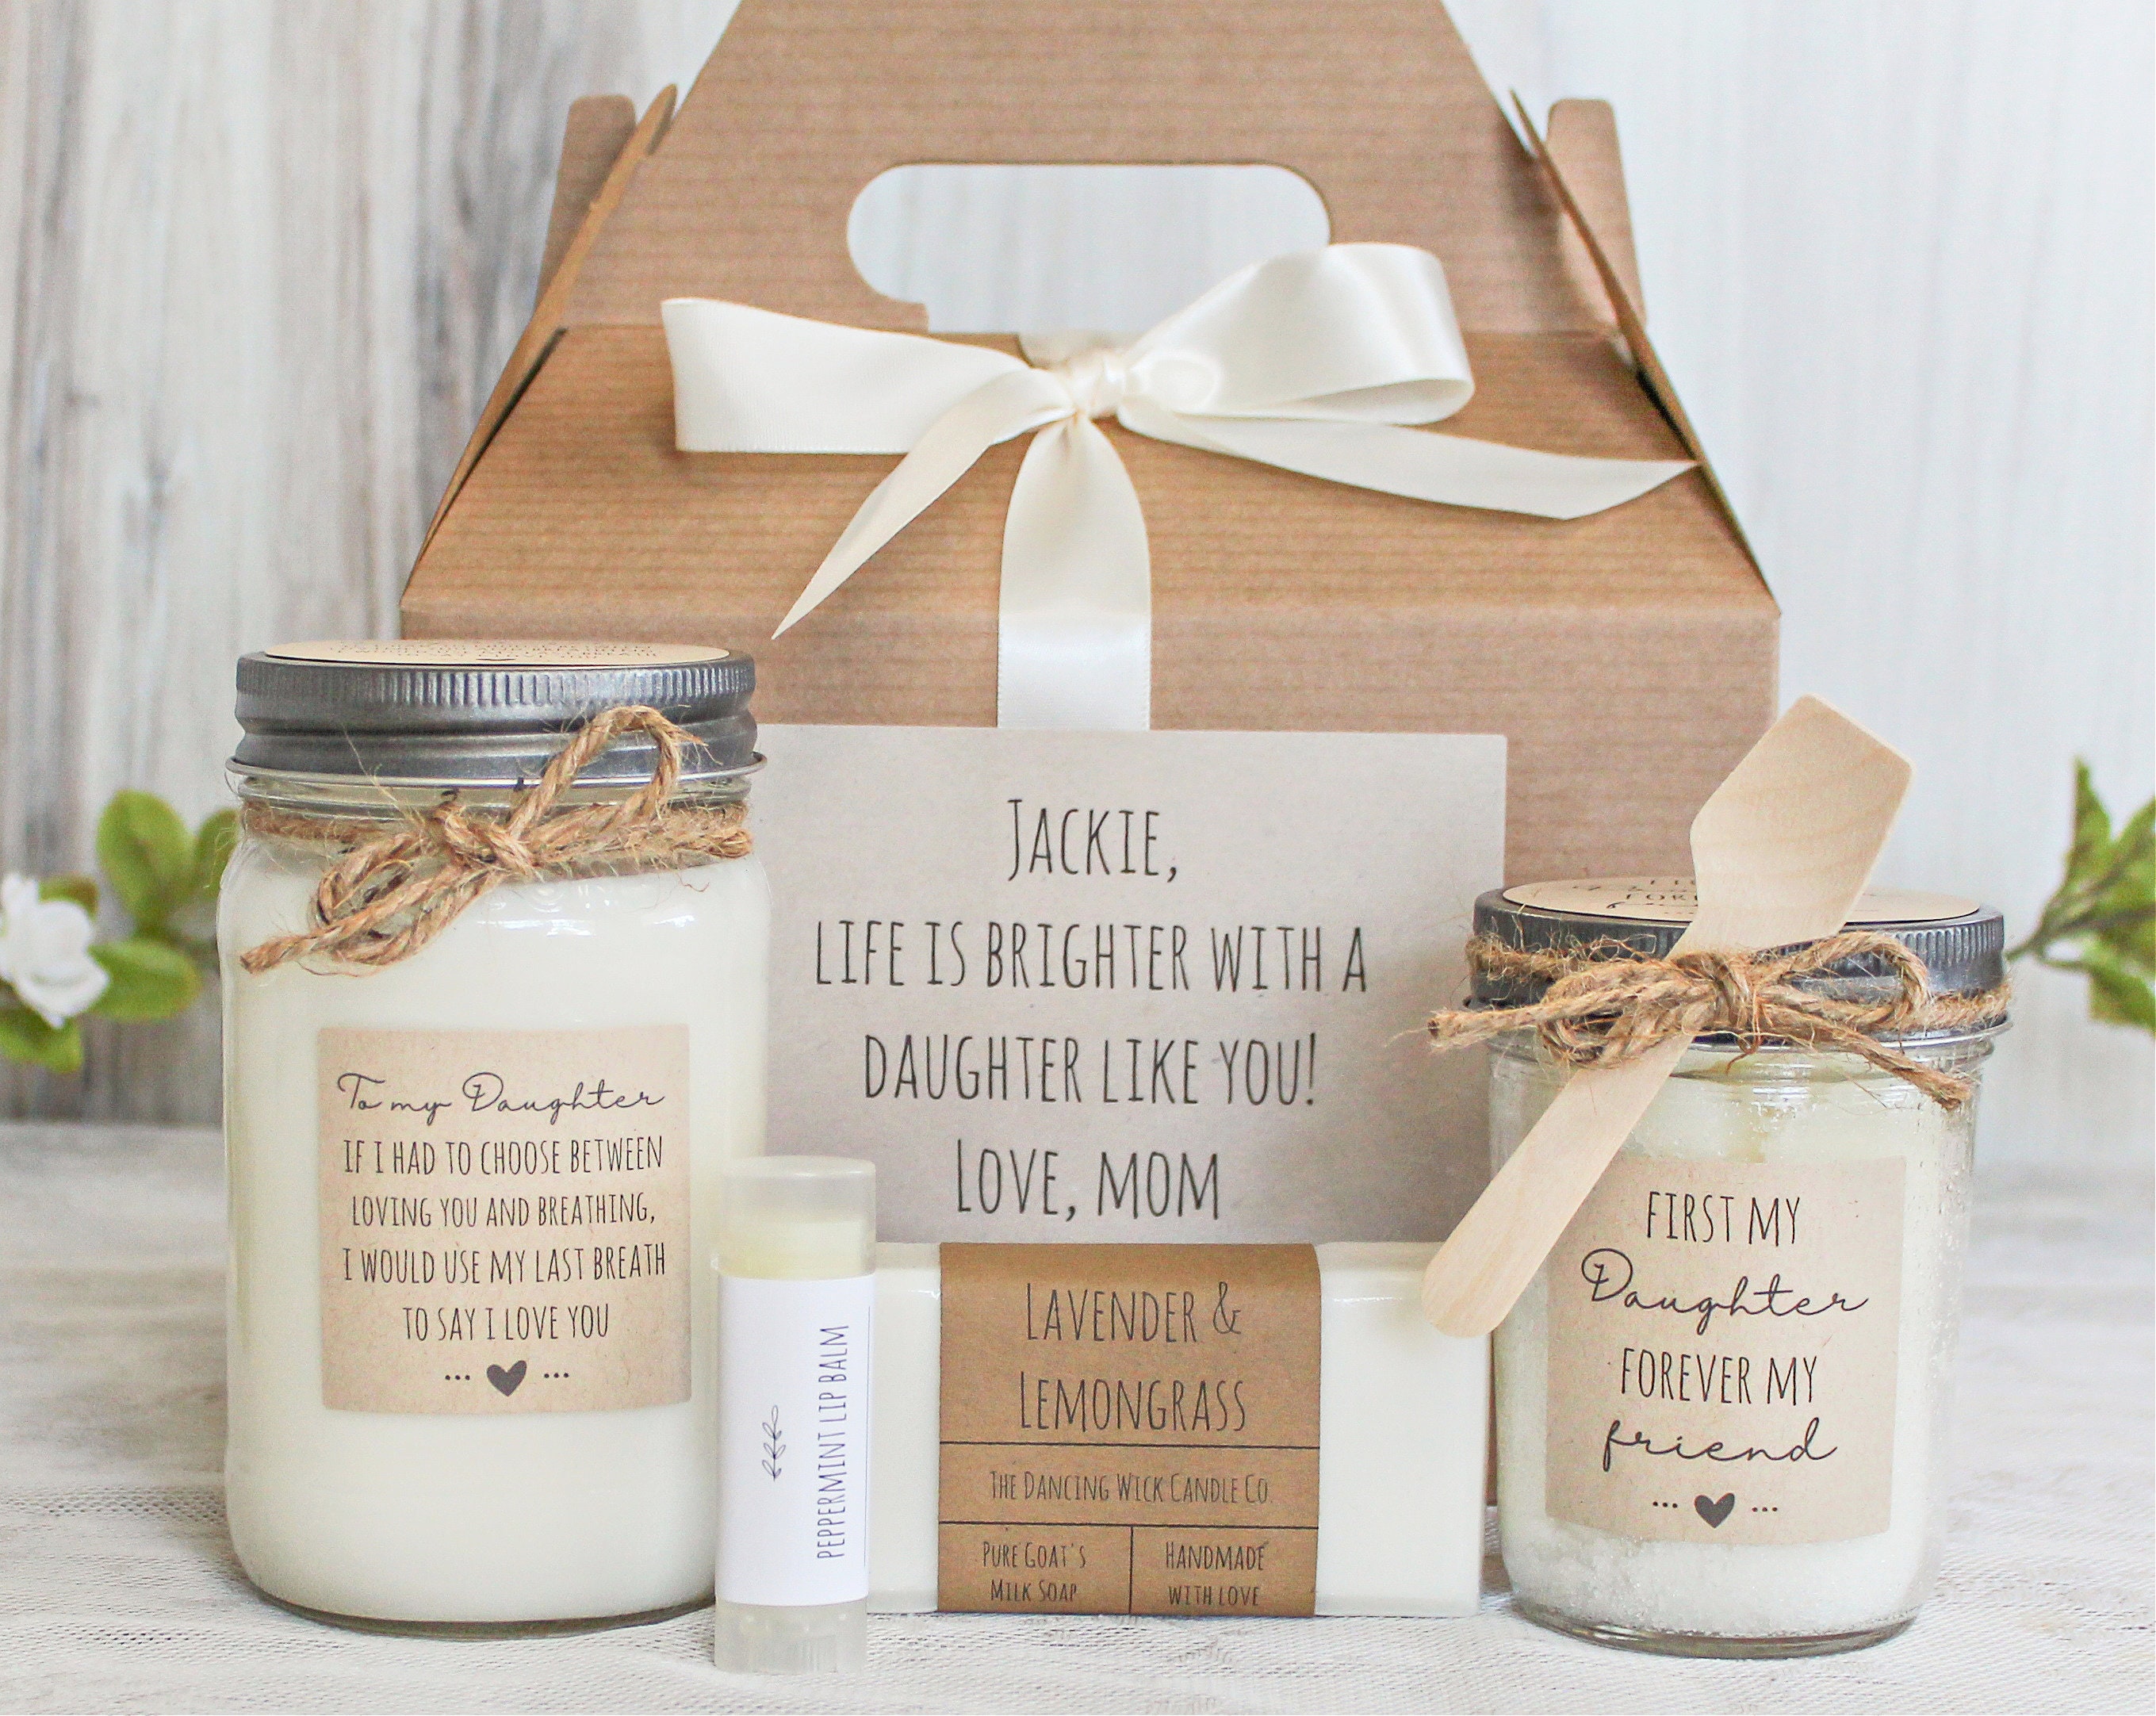 23 of the Best Birthday Gift Ideas for Mom from Daughter